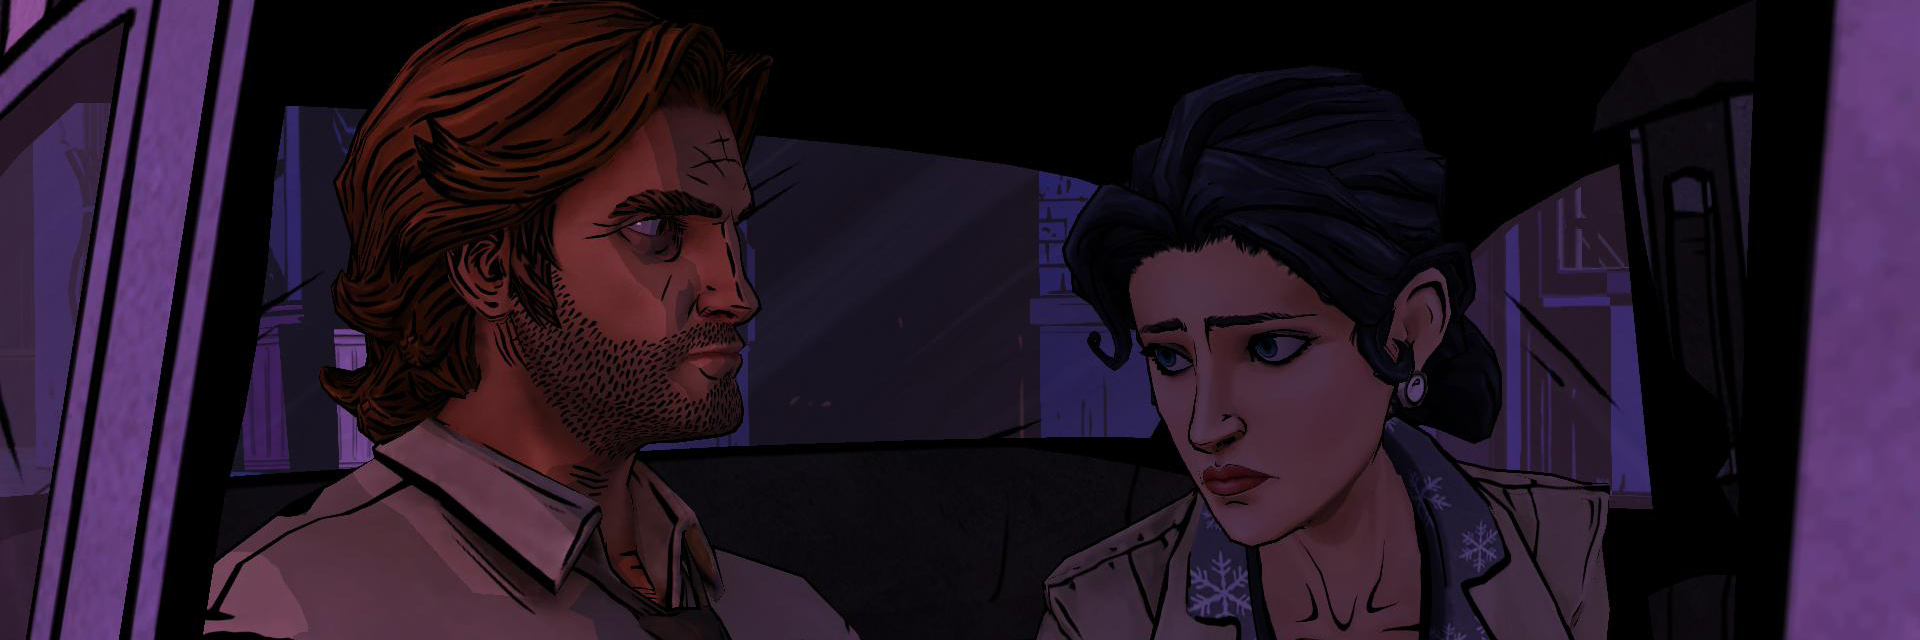 So I Just Played: The Wolf Among Us